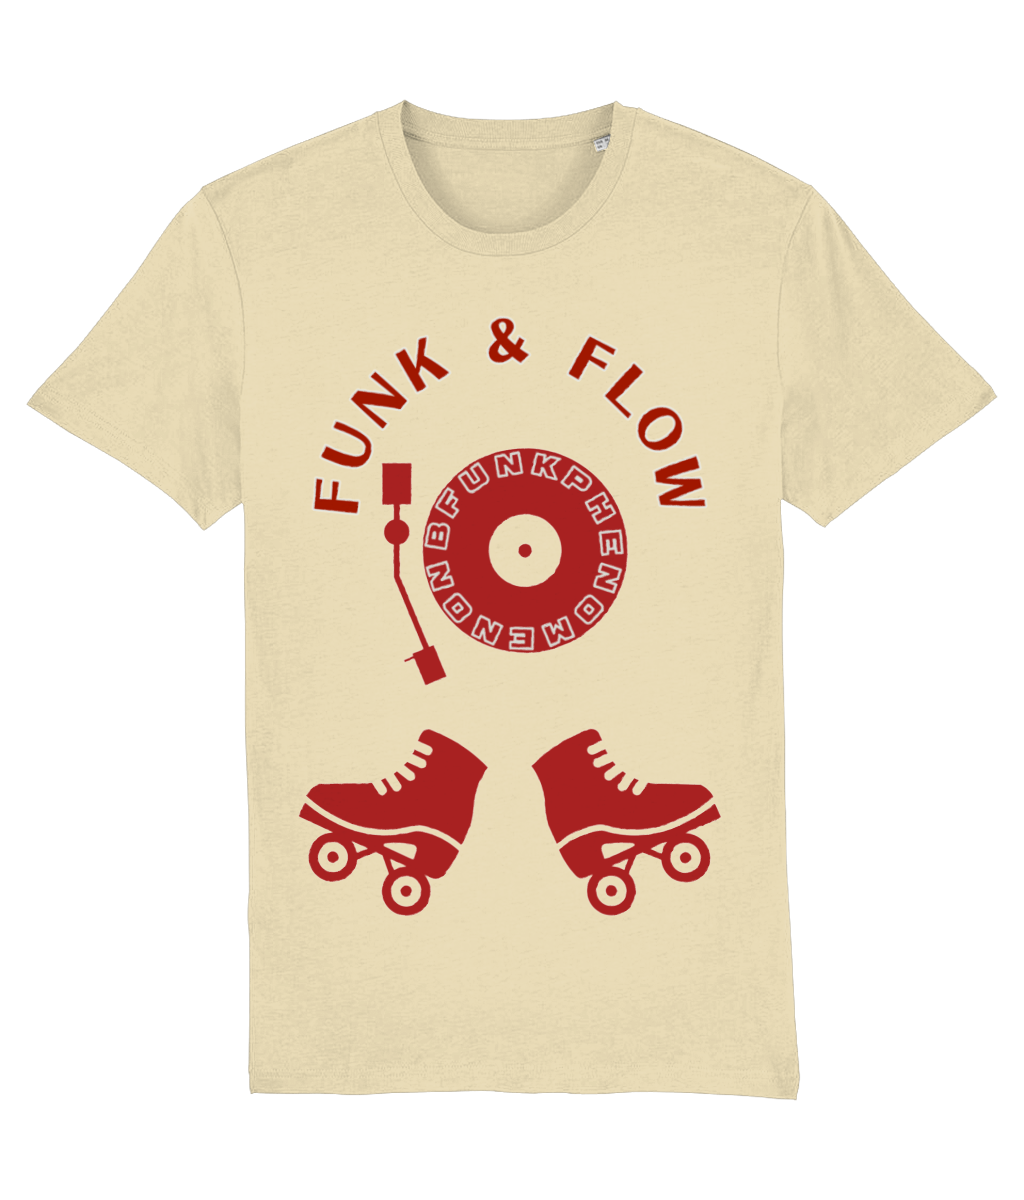 Tshirt Funk and Flow